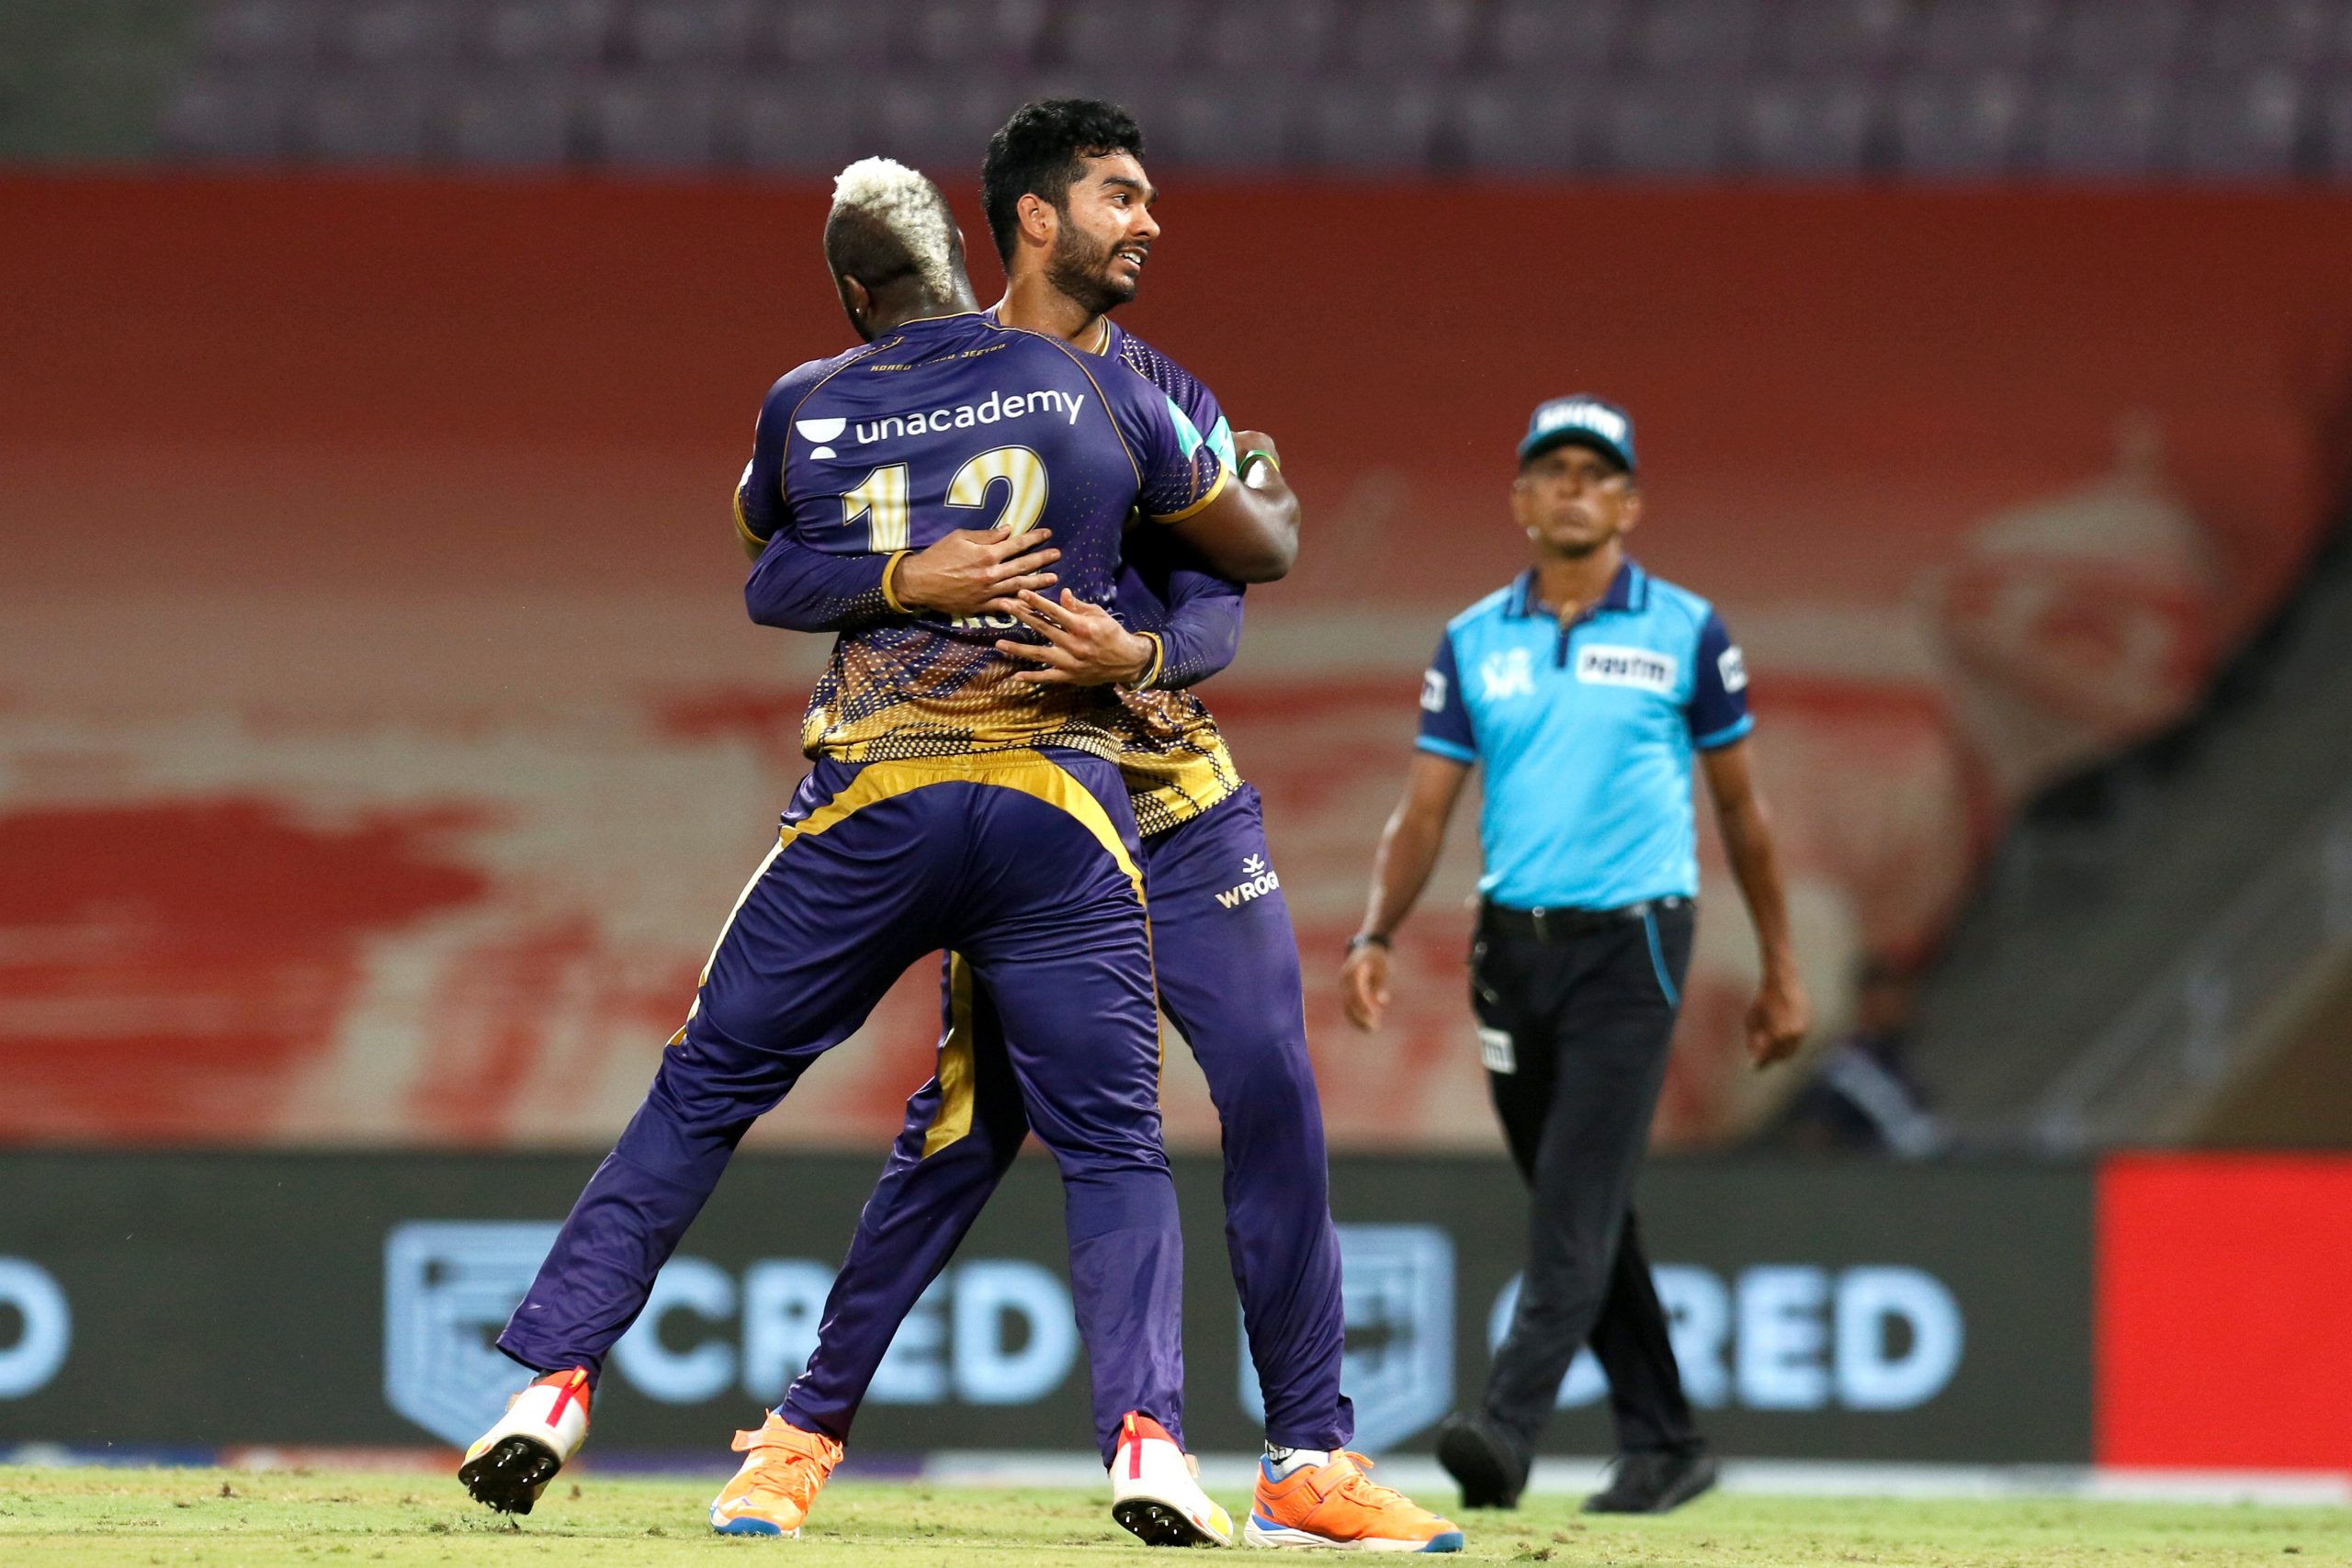 IPL 2022: KKR live to fight another day, beat Mumbai by 52 runs